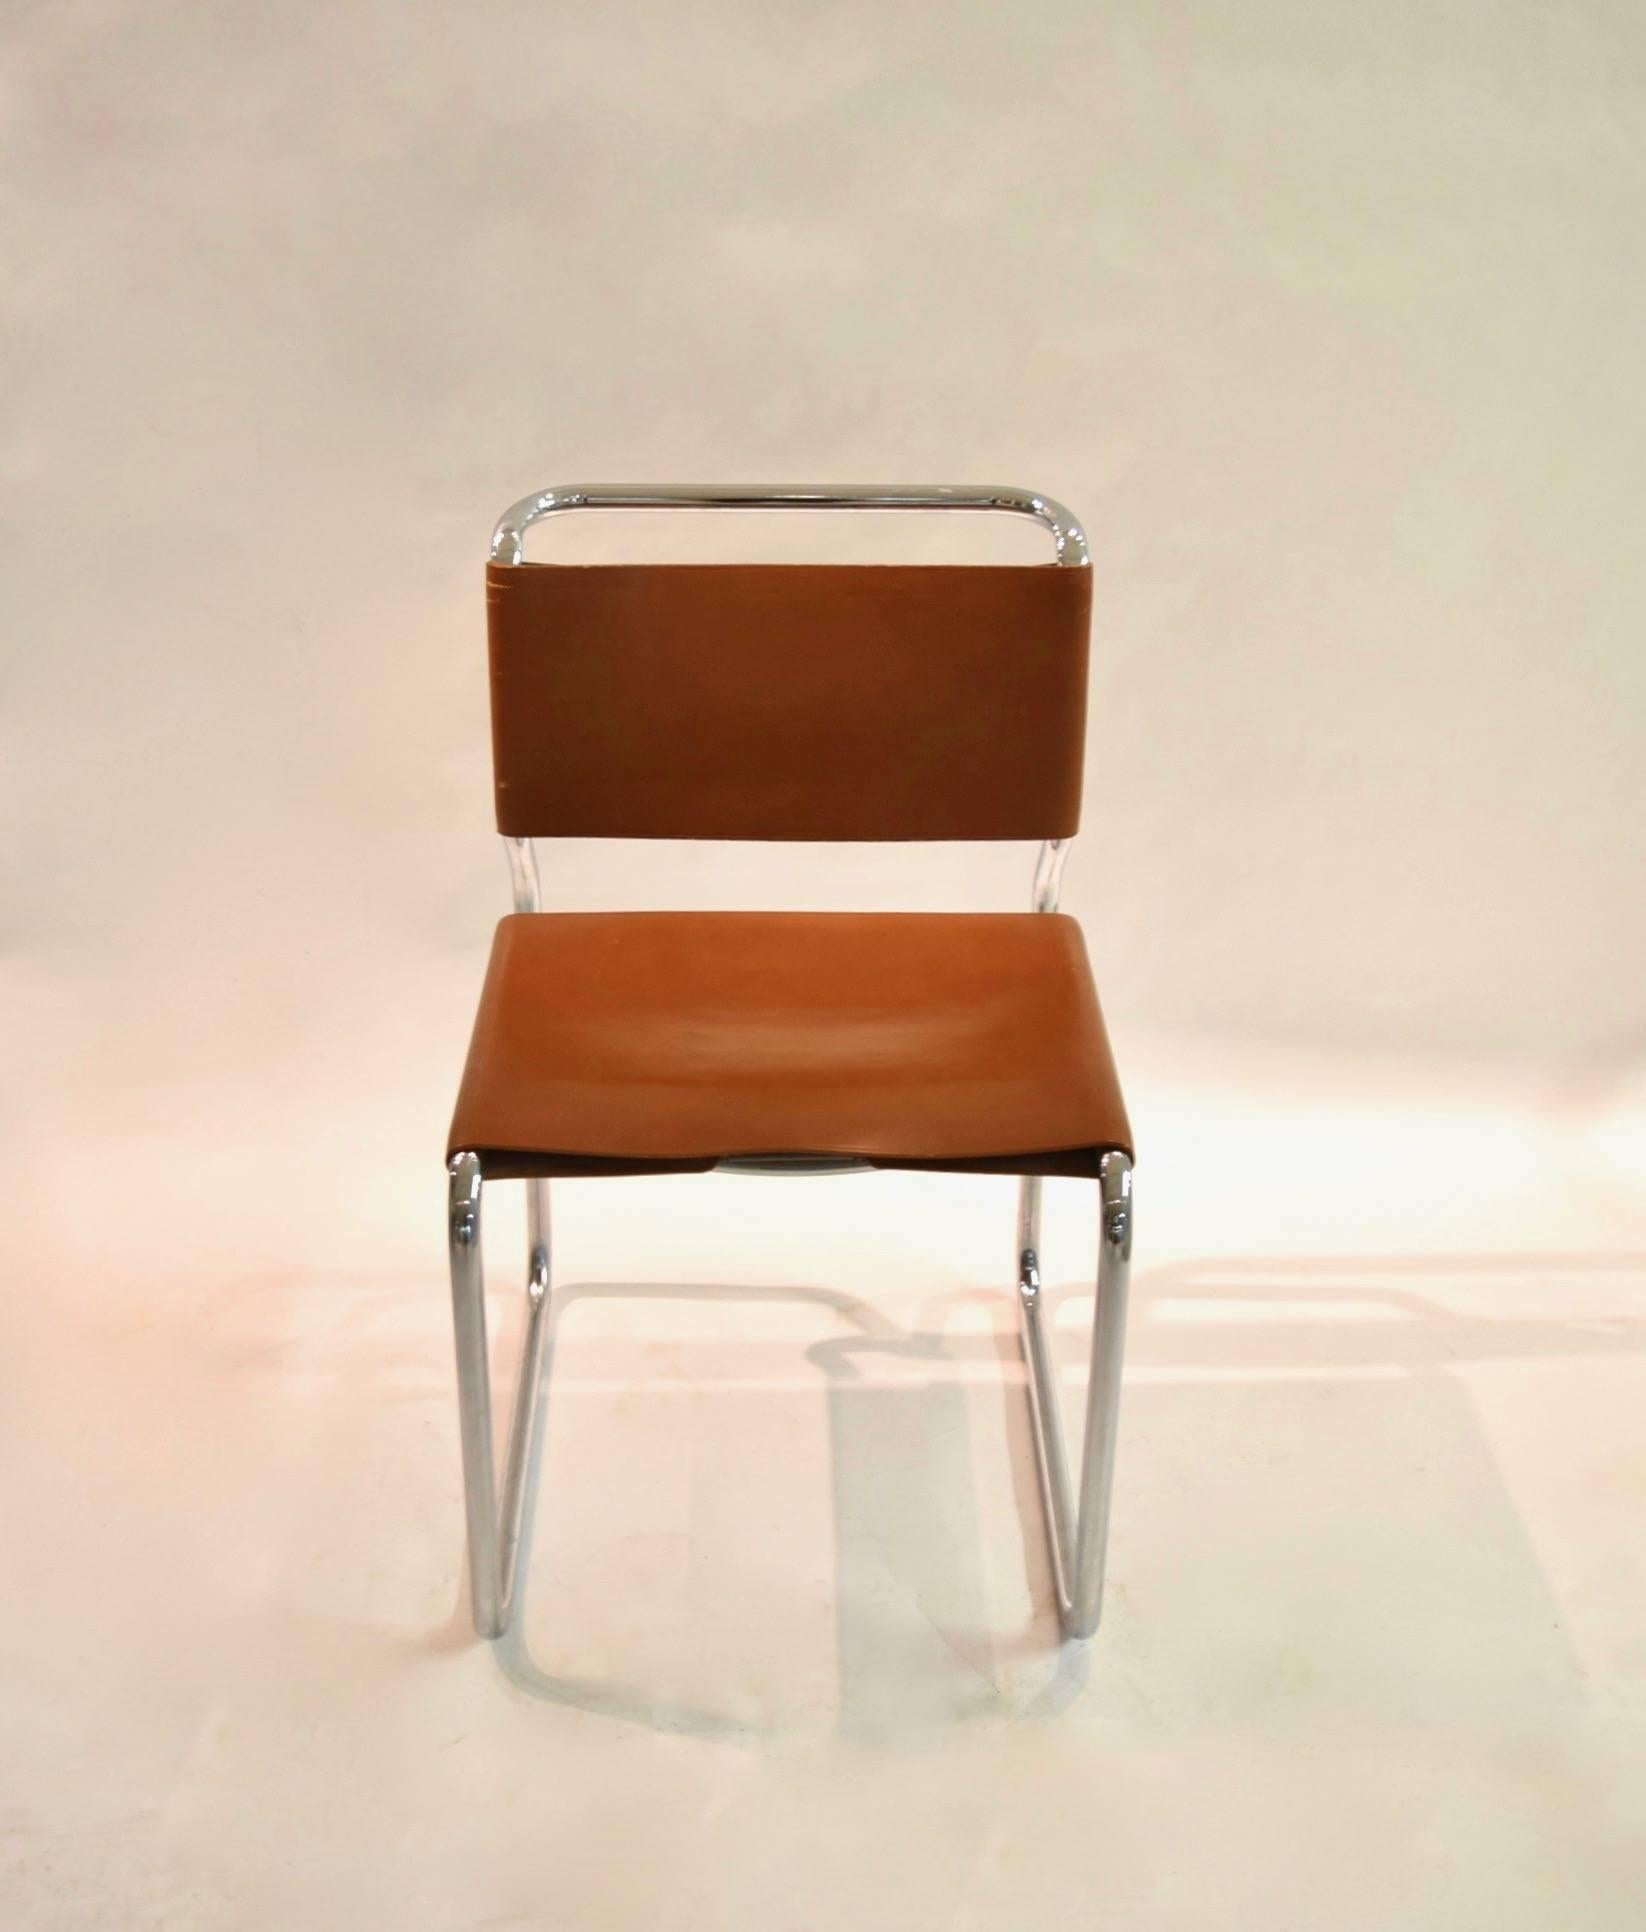 Six armless tubular steel side or dining chairs in excellent, original condition with light brown leather stretched as the seats and back rests; designed in 1966 by Nicos Zographos for The General Fireproofing Company.